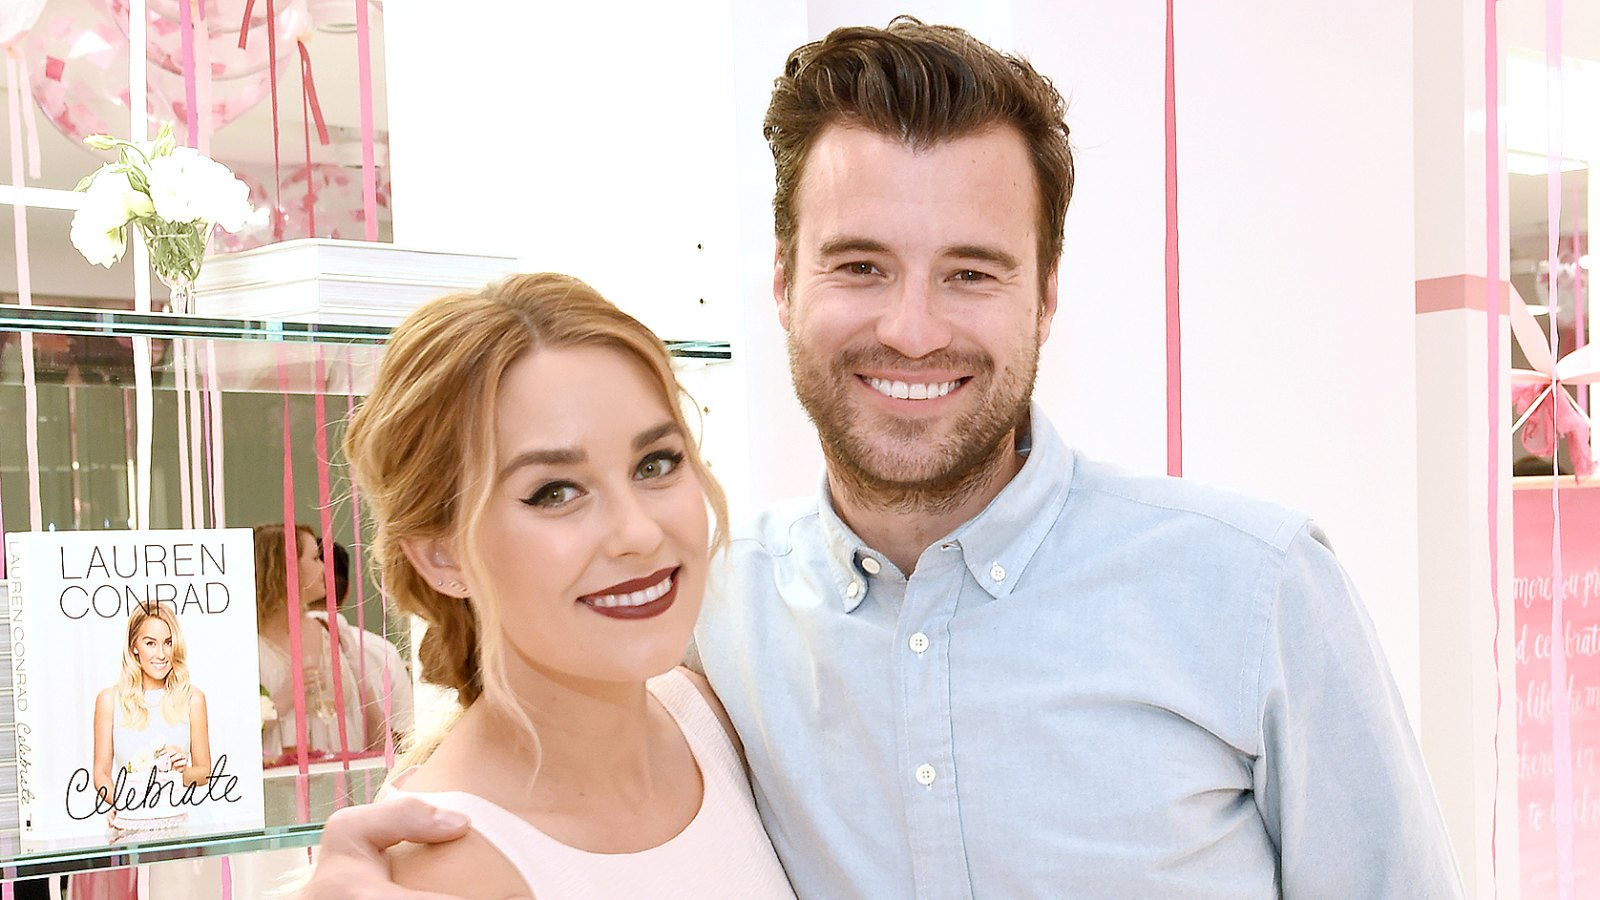 Lauren Conrad and William Tell attend the "Lauren Conrad Celebrate" book launch party at Kohl's Showroom on March 23, 2016 in New York City.